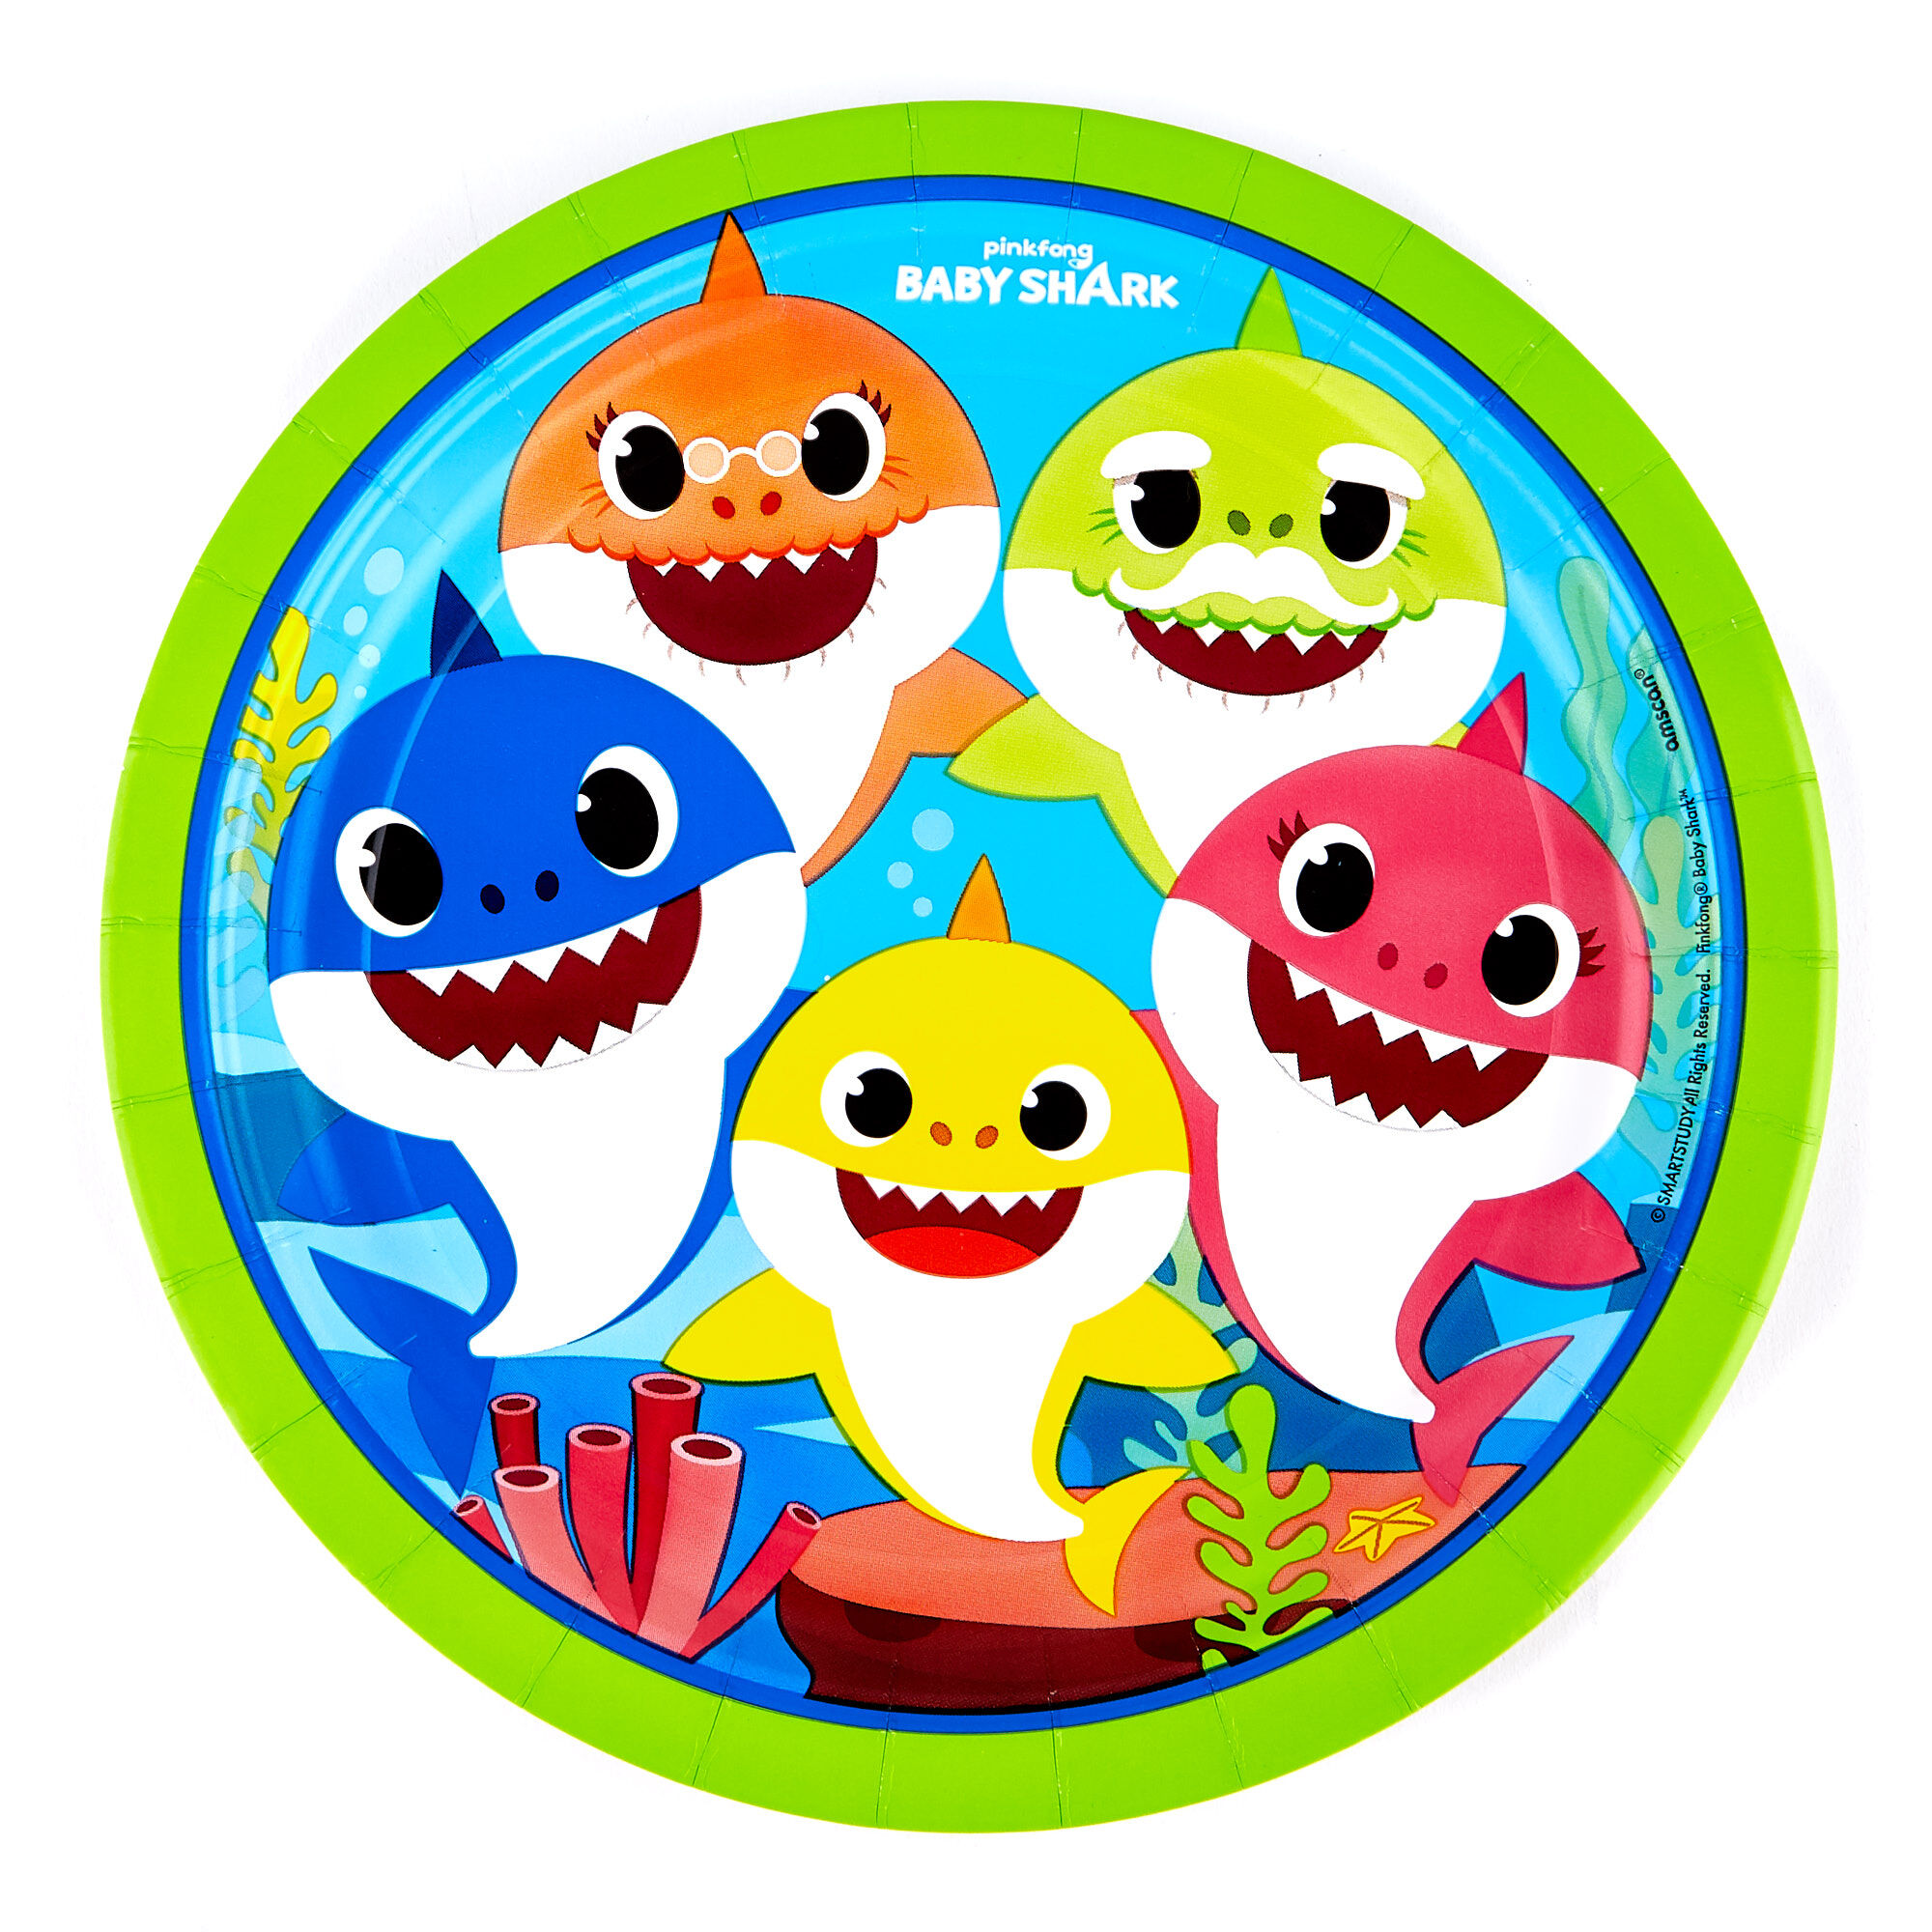 Buy Baby Shark Party Tableware & Decorations Bundle - 16 Guests for GBP 15.99